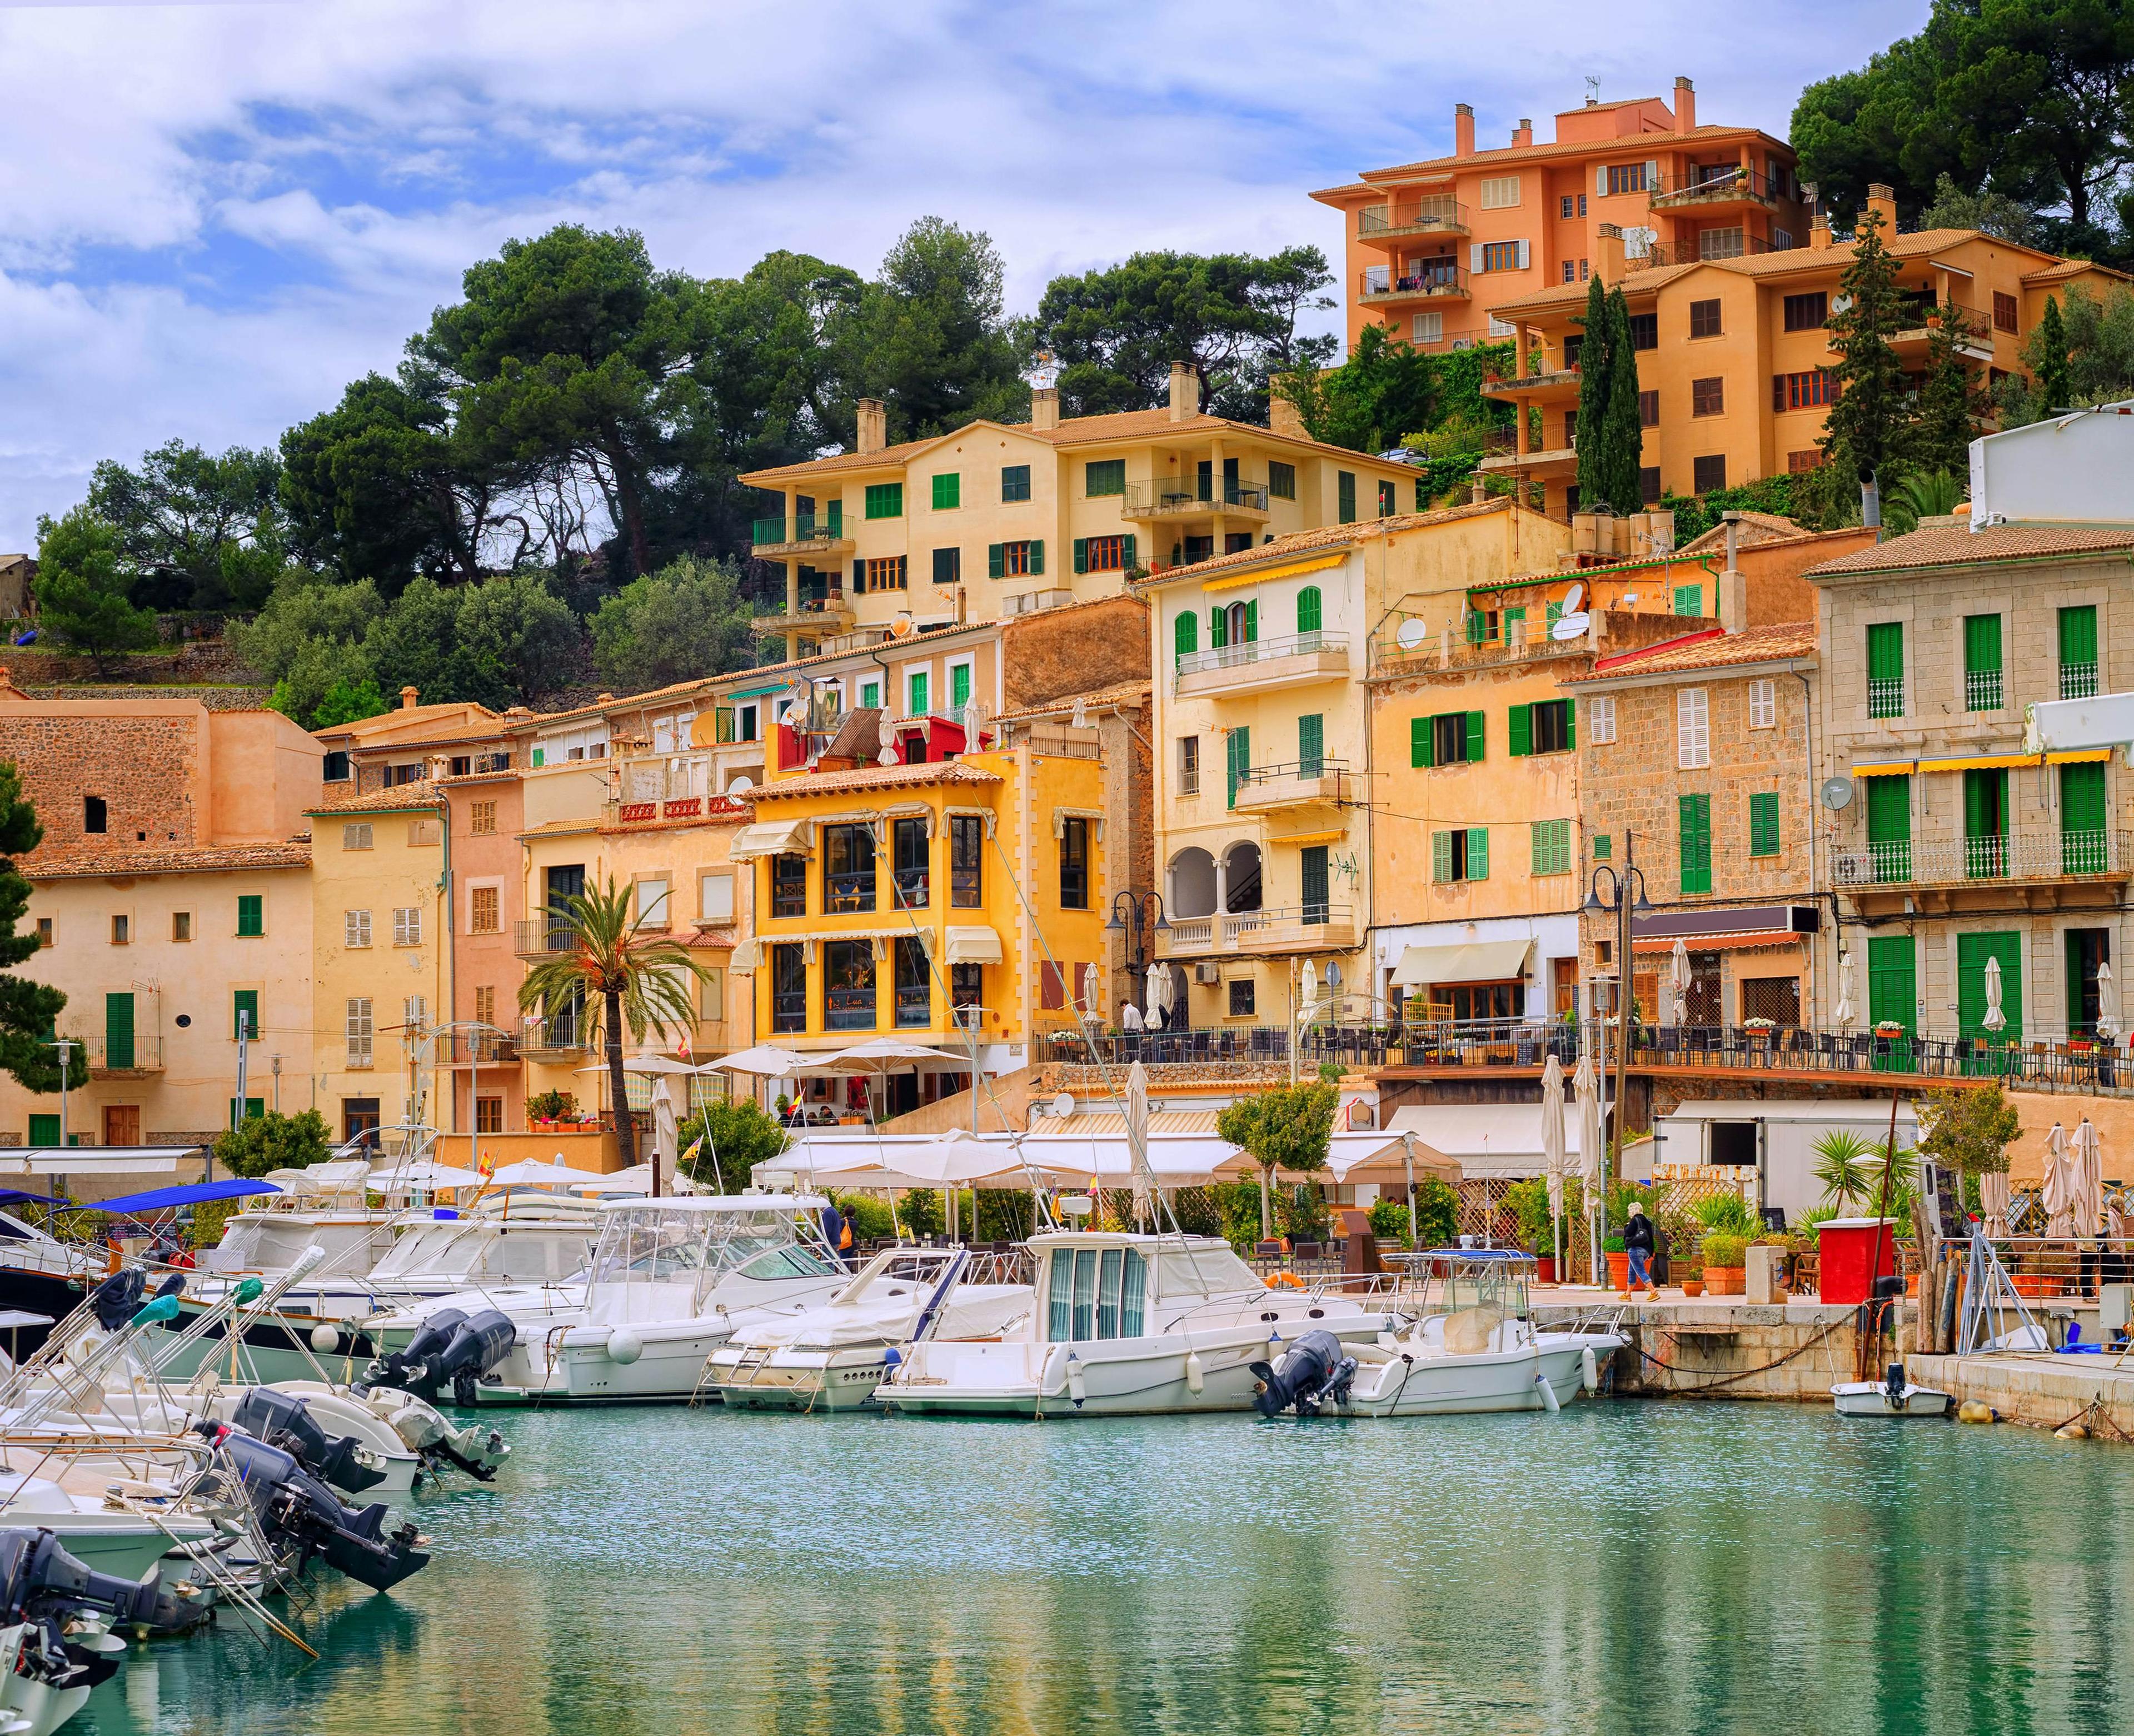 Motor boats and traditional waterside houses in Puerto Soller, Mallorca, Spain.